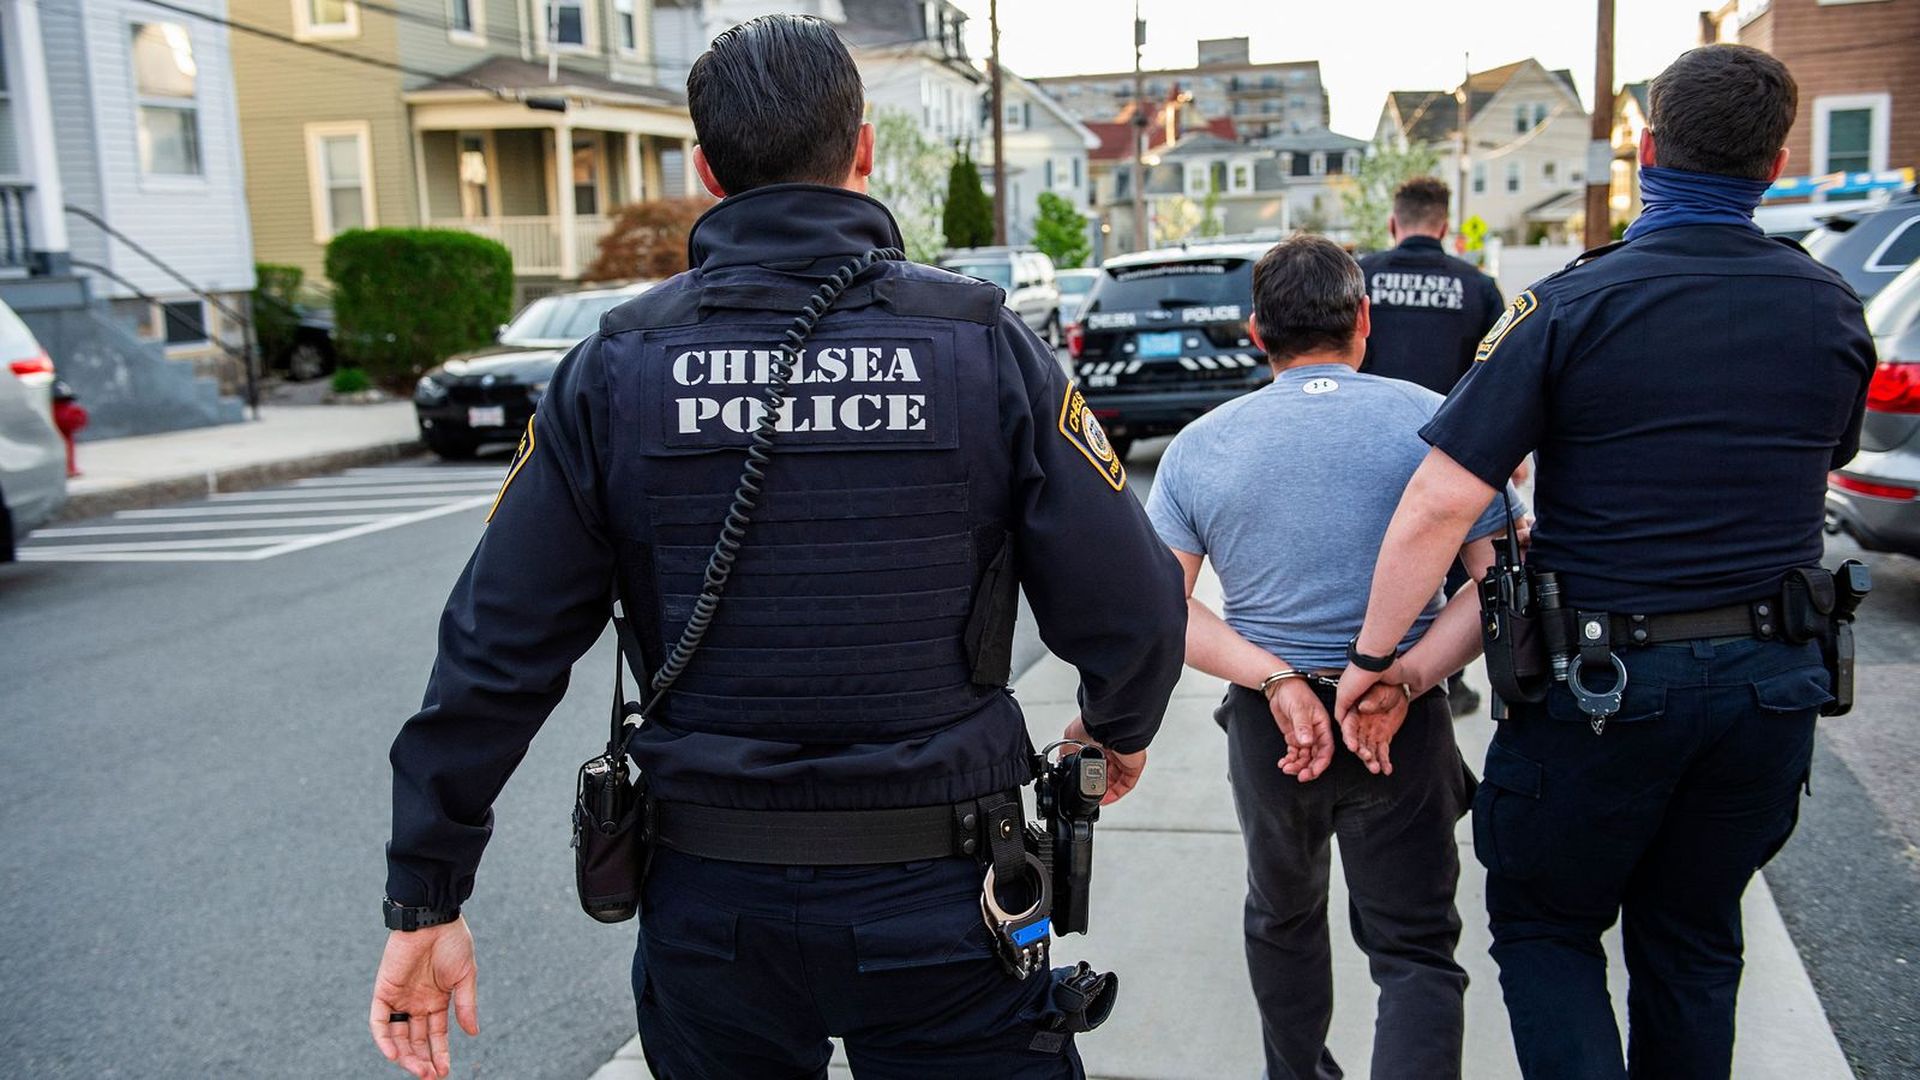 Officers arrest a man in predominately Latino city of Chelsea, Massachusetts on May 1, 2021. Photo: Joseph Prezioso/AFP via Getty Images